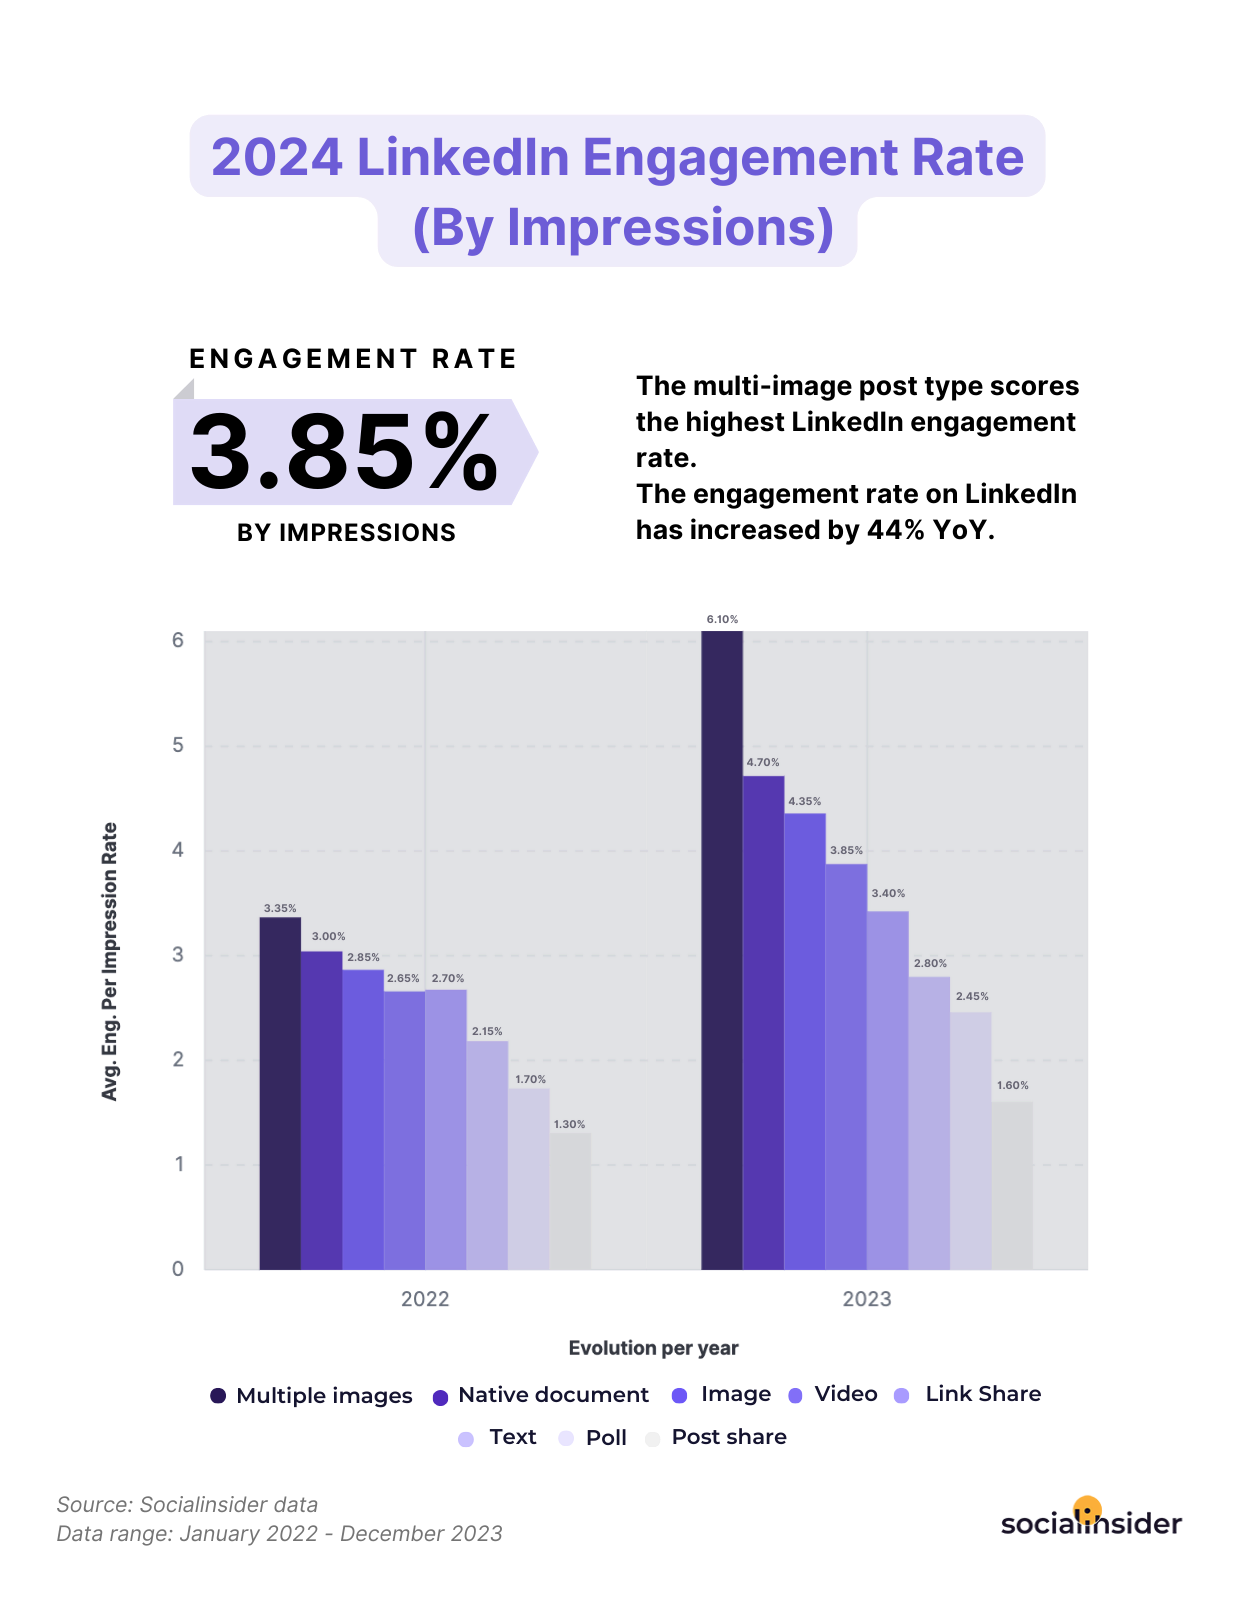 linkedin benchmarks 2024 engagement rate by impressions